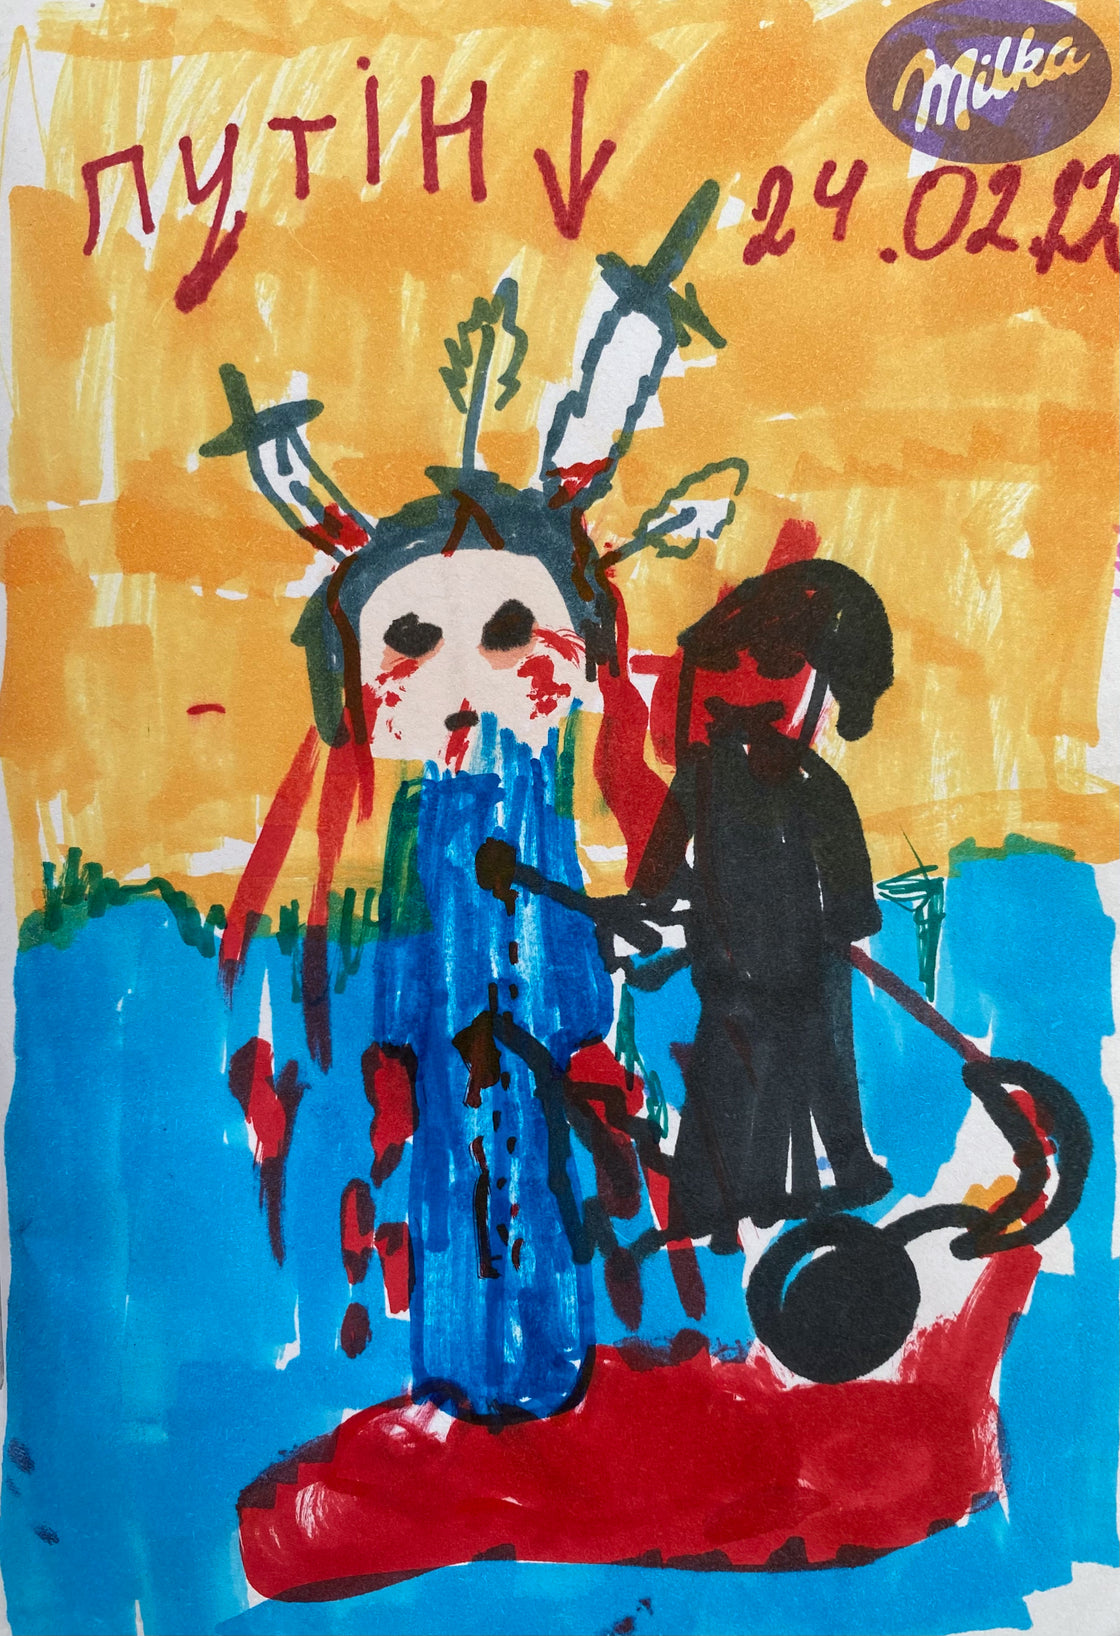 One little man made the whole world cry - Child's drawing done whilst hiding in a bomb shelter in Kyiv